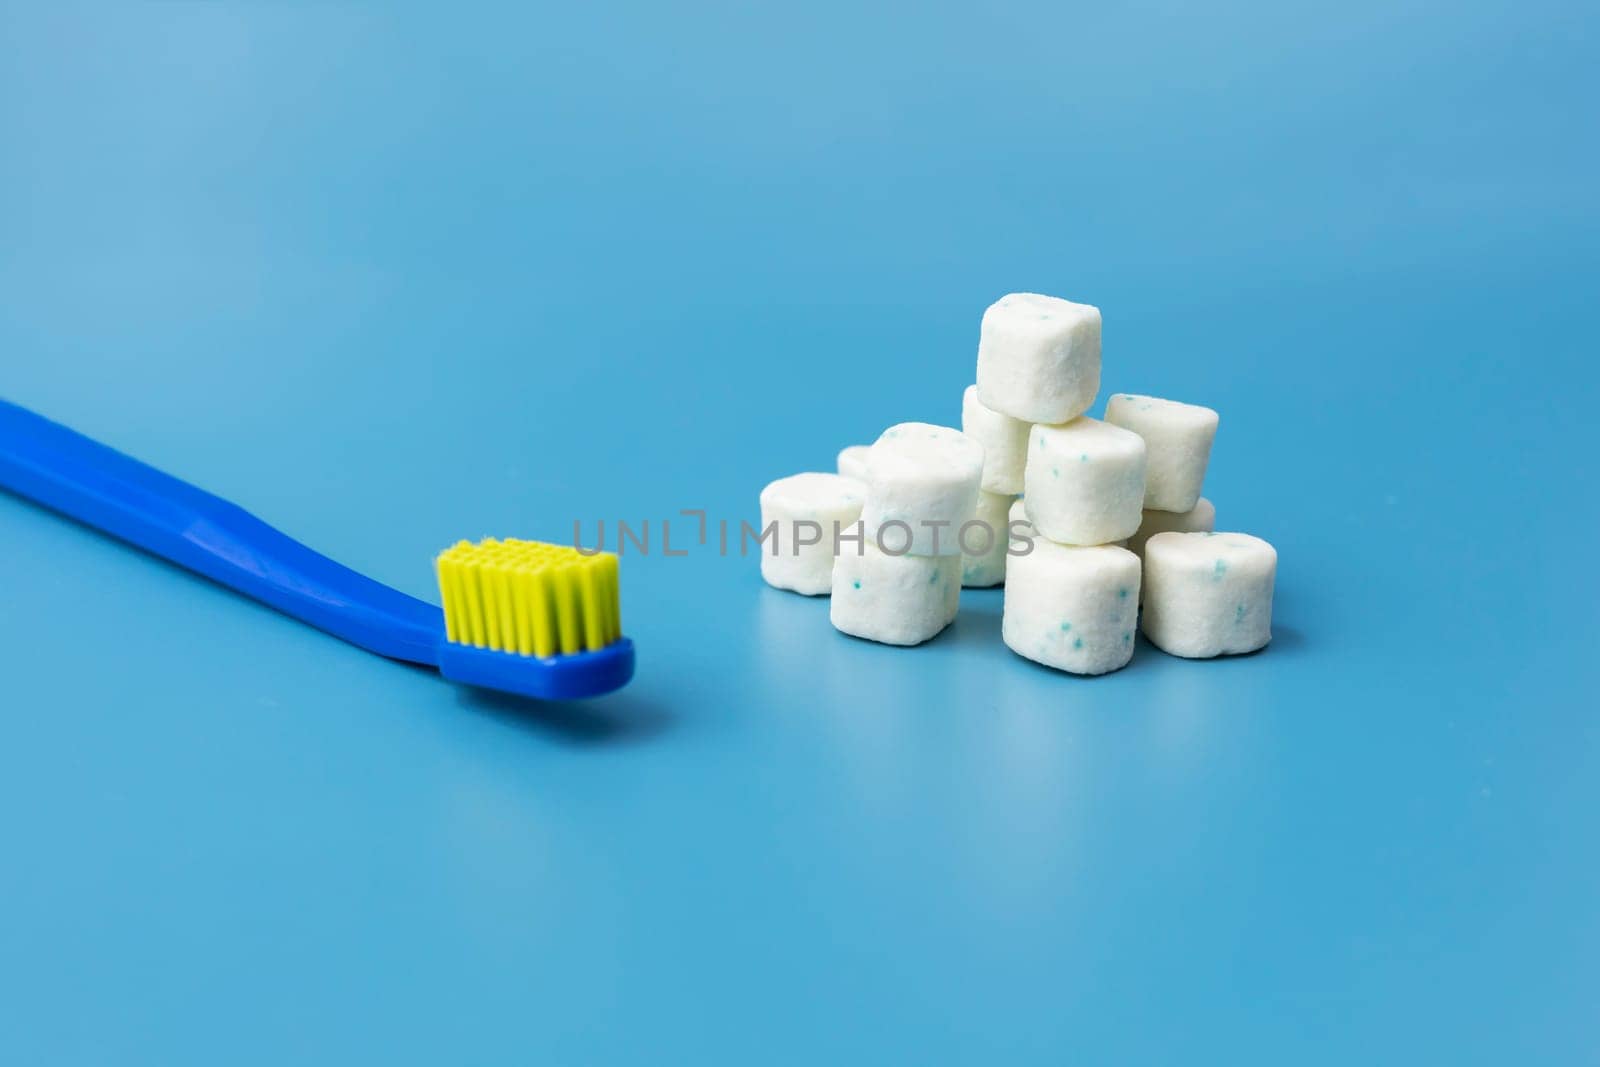 Bunch Of Healthy Sugar-Free Xylitol Cubes Of White Chewing Gum, Toothbrush on Blue Background. Healthy Teeth, Beautiful Smile Concept. Top View, Copy Space. Heap of Bubble Gum. Horizontal Plane. by netatsi